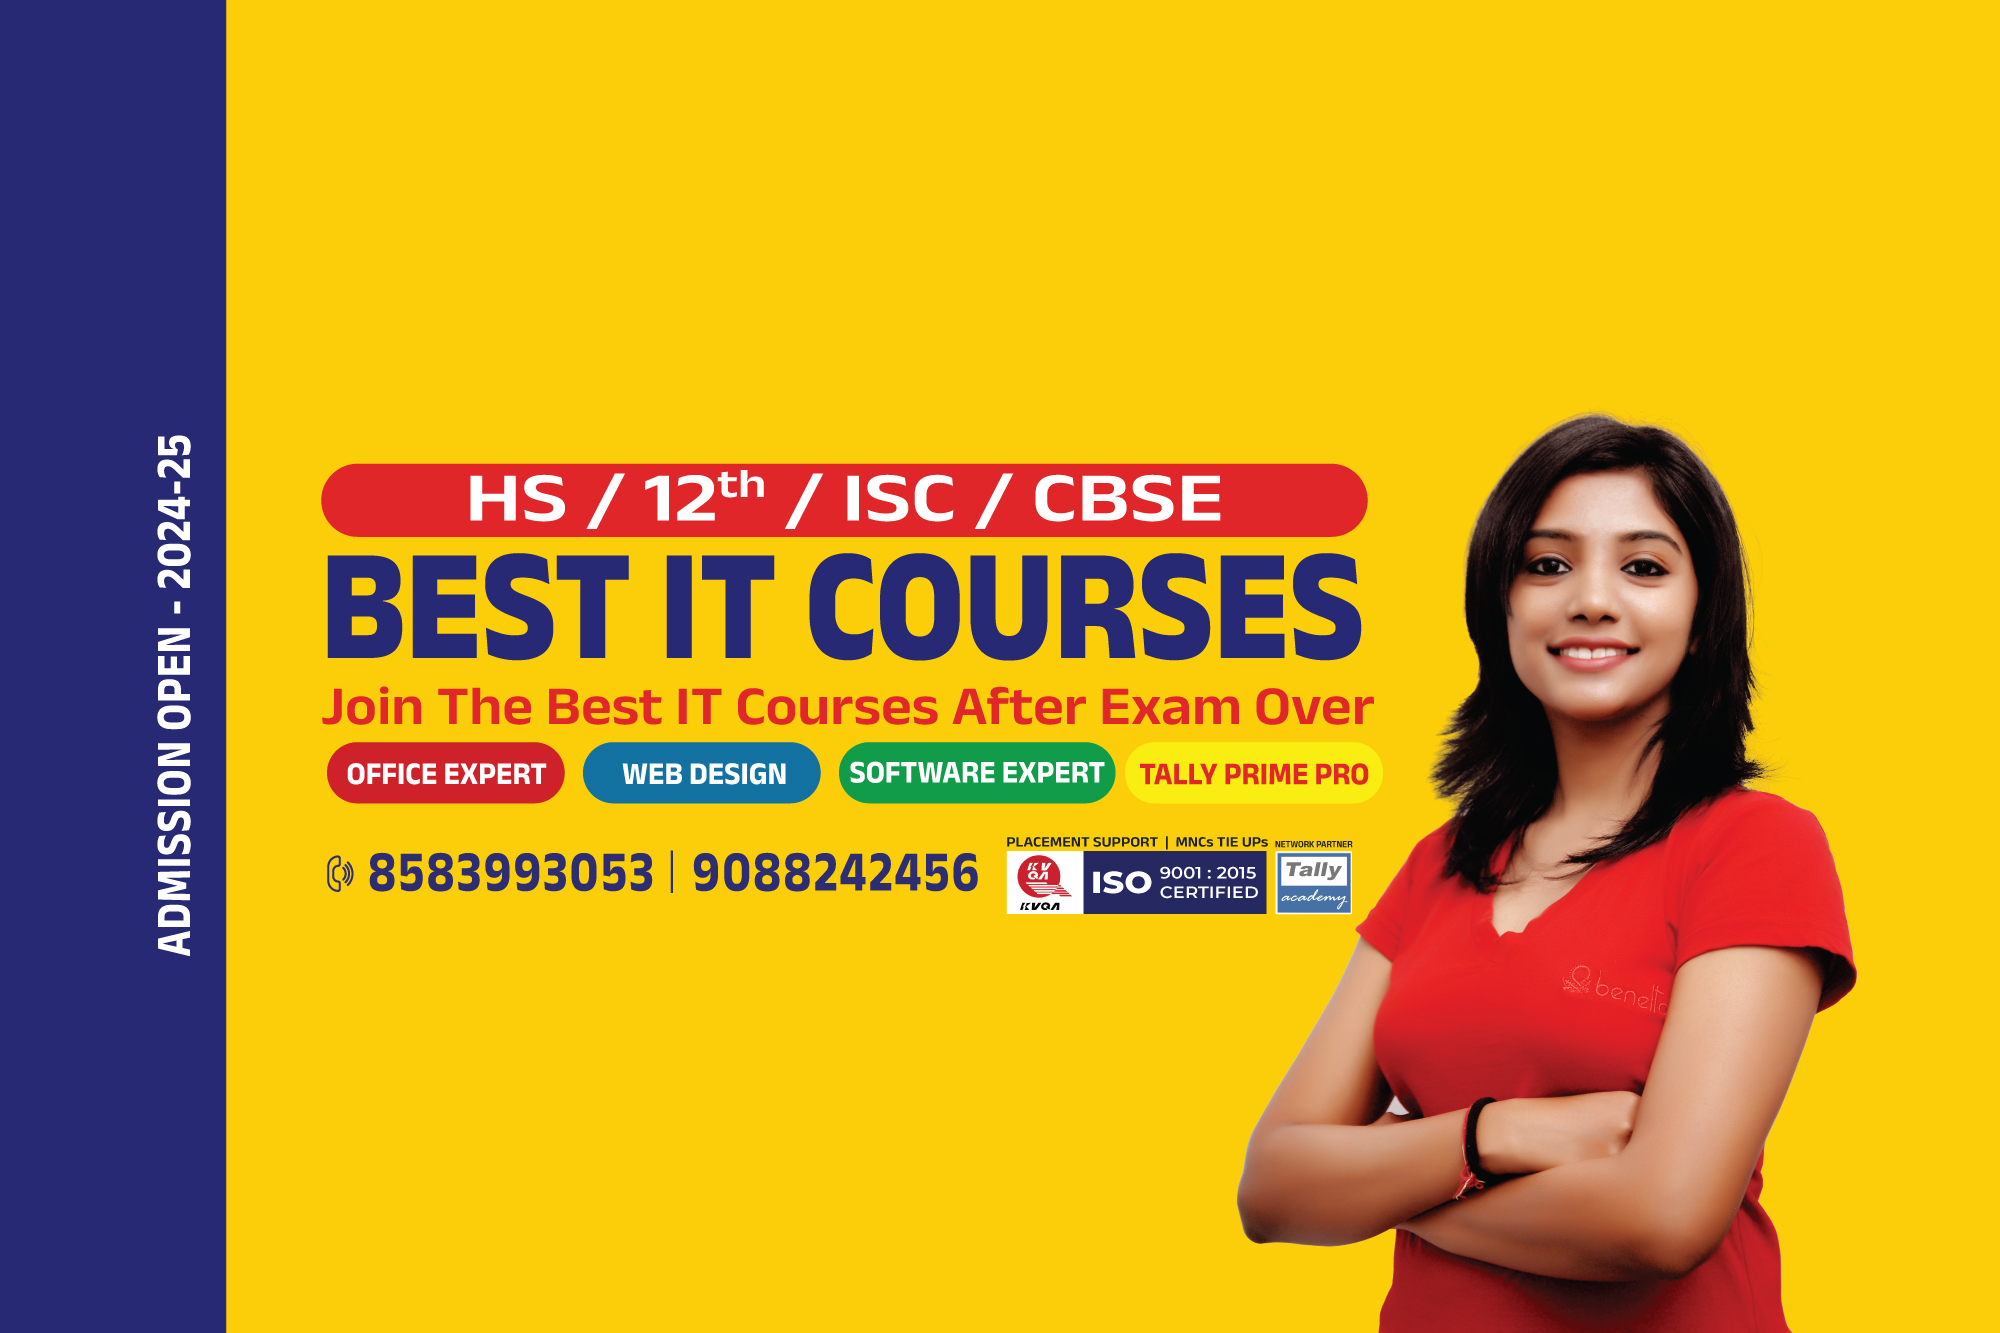 Best IT Courses for HS, ISC, CBSE students